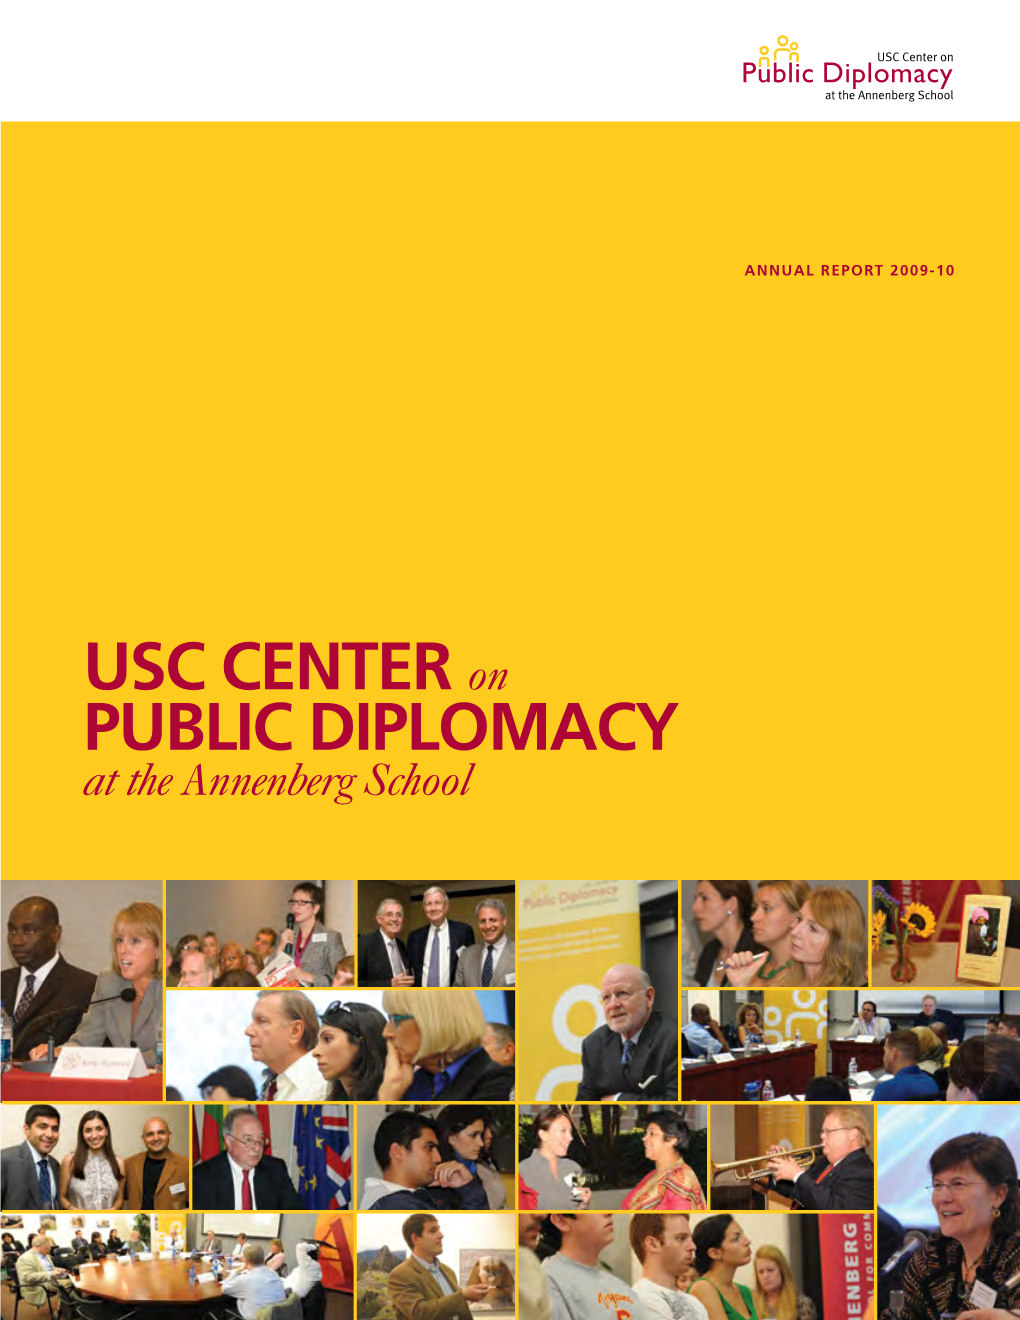 2009-2010, the USC Center on Public Diplomacy Has Expanded Its National and International Reach to Great Effect